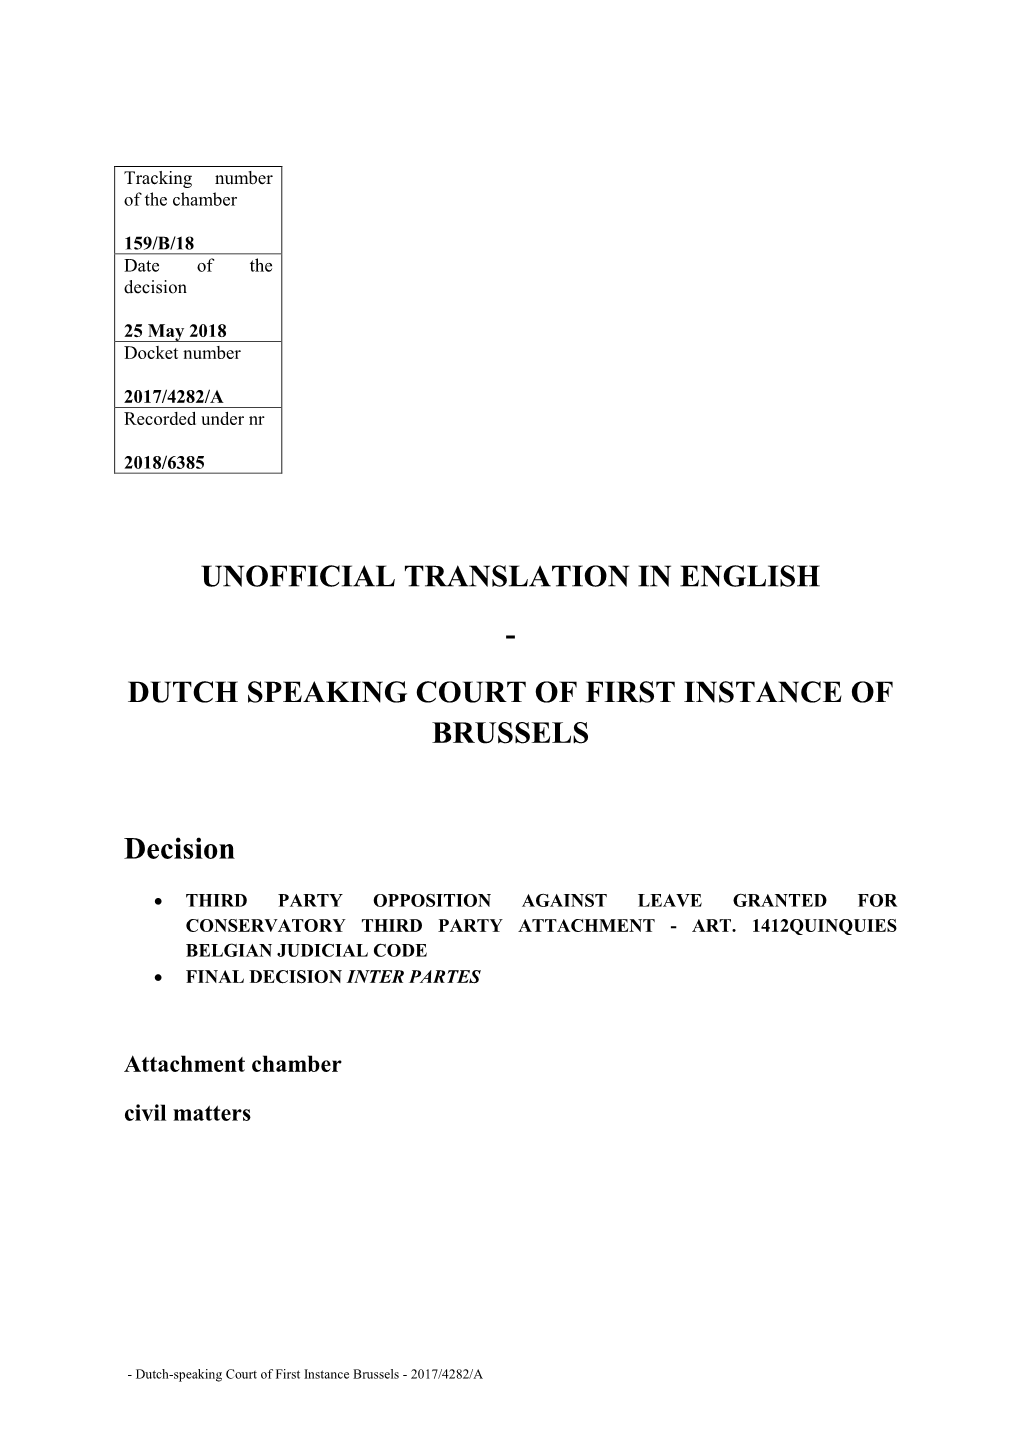 Dutch Speaking Court of First Instance of Brussels